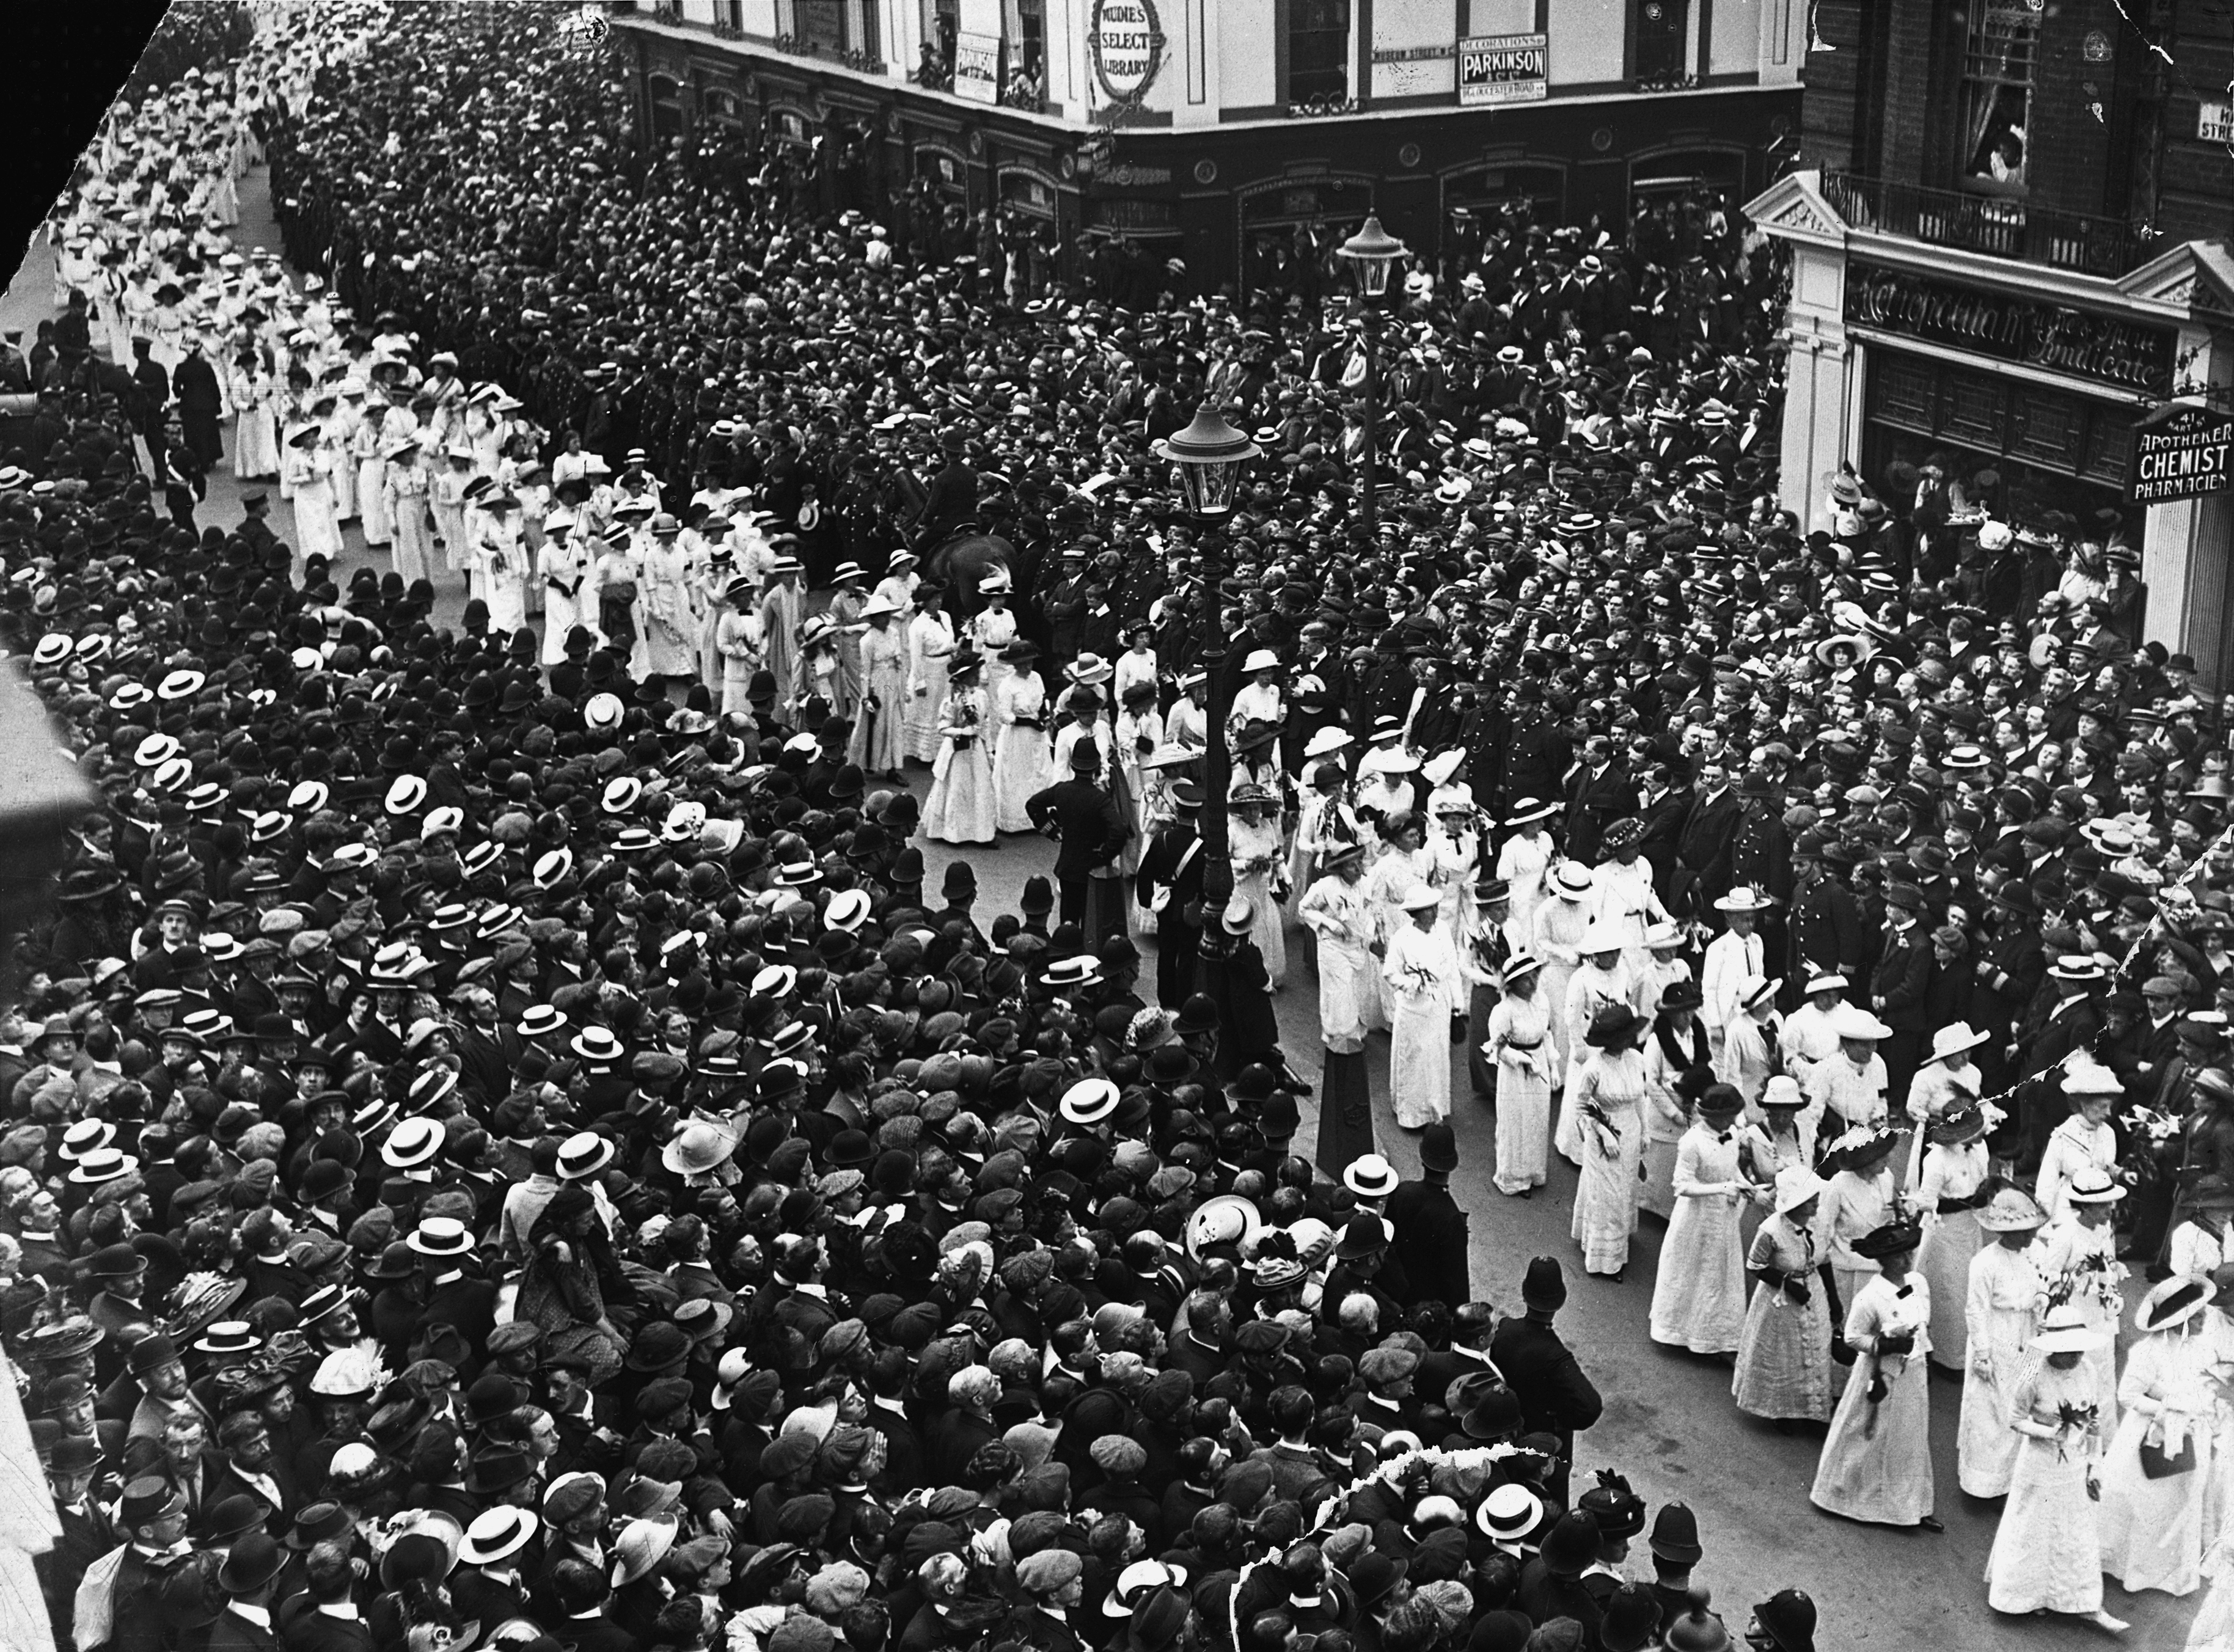 Suffragettes dressed in white follow the mourning procession at the funeral of Emily Davidson, the suffragette who was killed when she threw herself in front of King George V's horse at the Epsom Derby as an act of protest. (Photo by © Hulton-Deutsch Collection/CORBIS/Corbis via Getty Images) (Hulton Deutsch—Corbis via Getty Images)